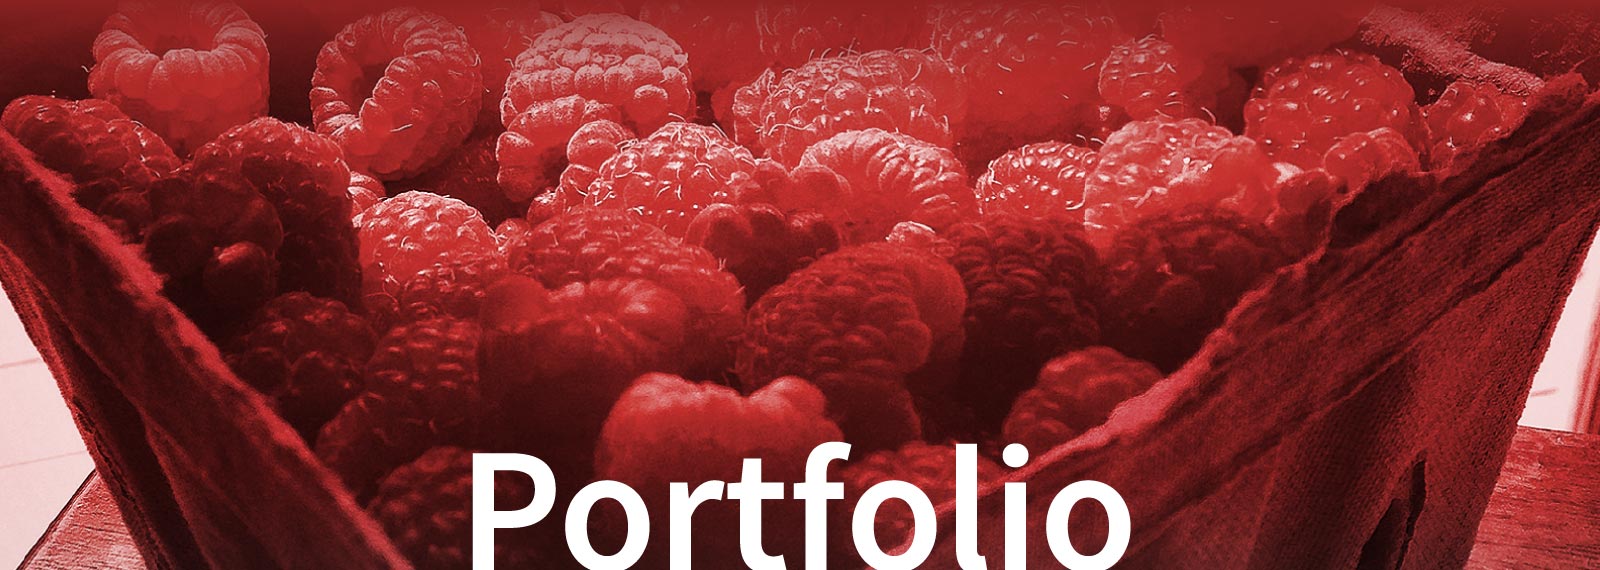 banner image for Portfolio page - close up of a basket of raspberries, all washed in a red hue.